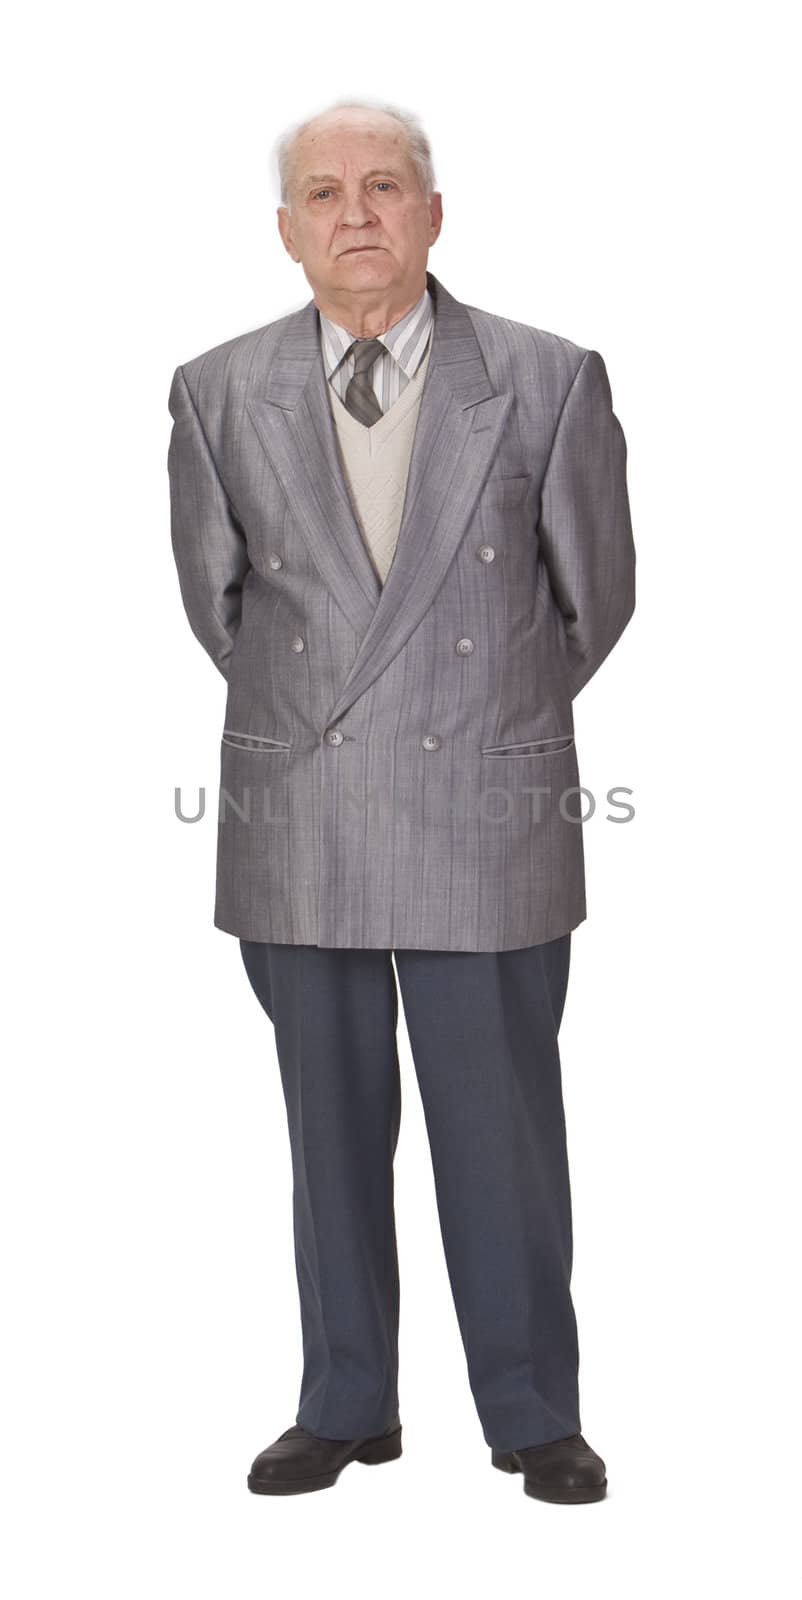 Senior man standing up against a white background.